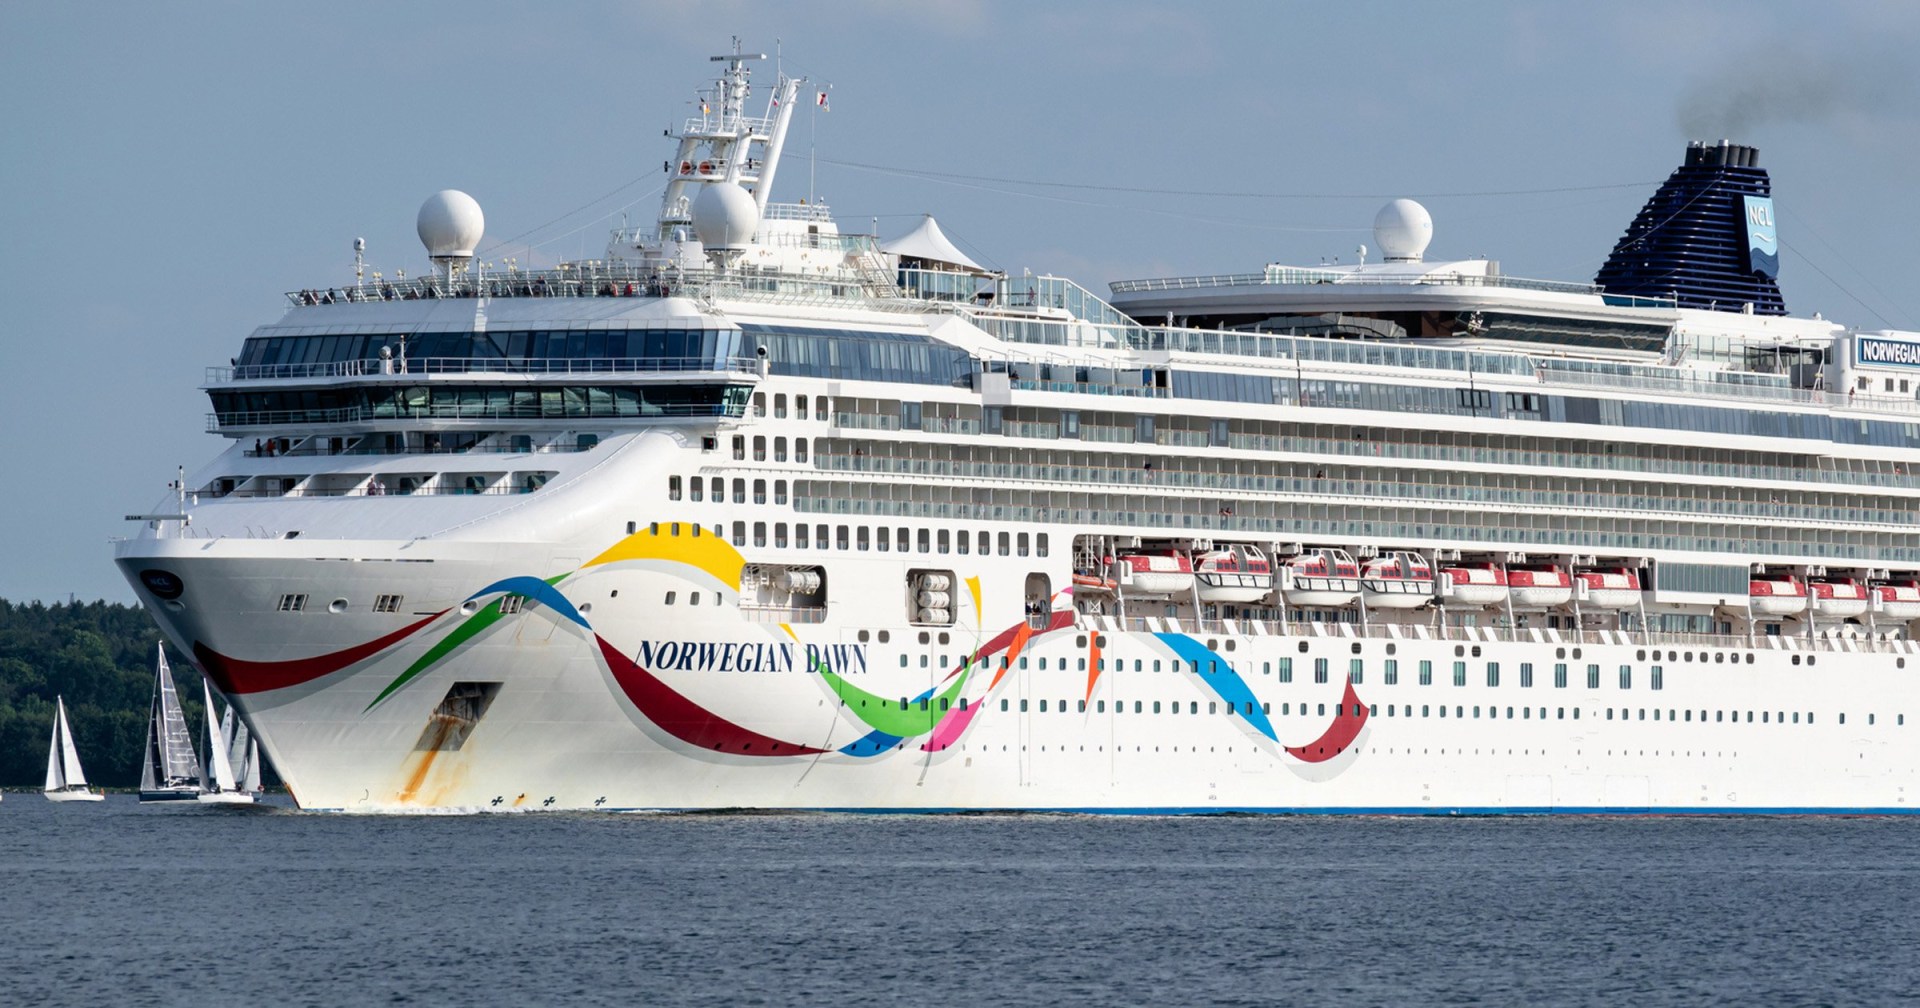 cruise ship banned from docking over fears of cholera outbreak on board